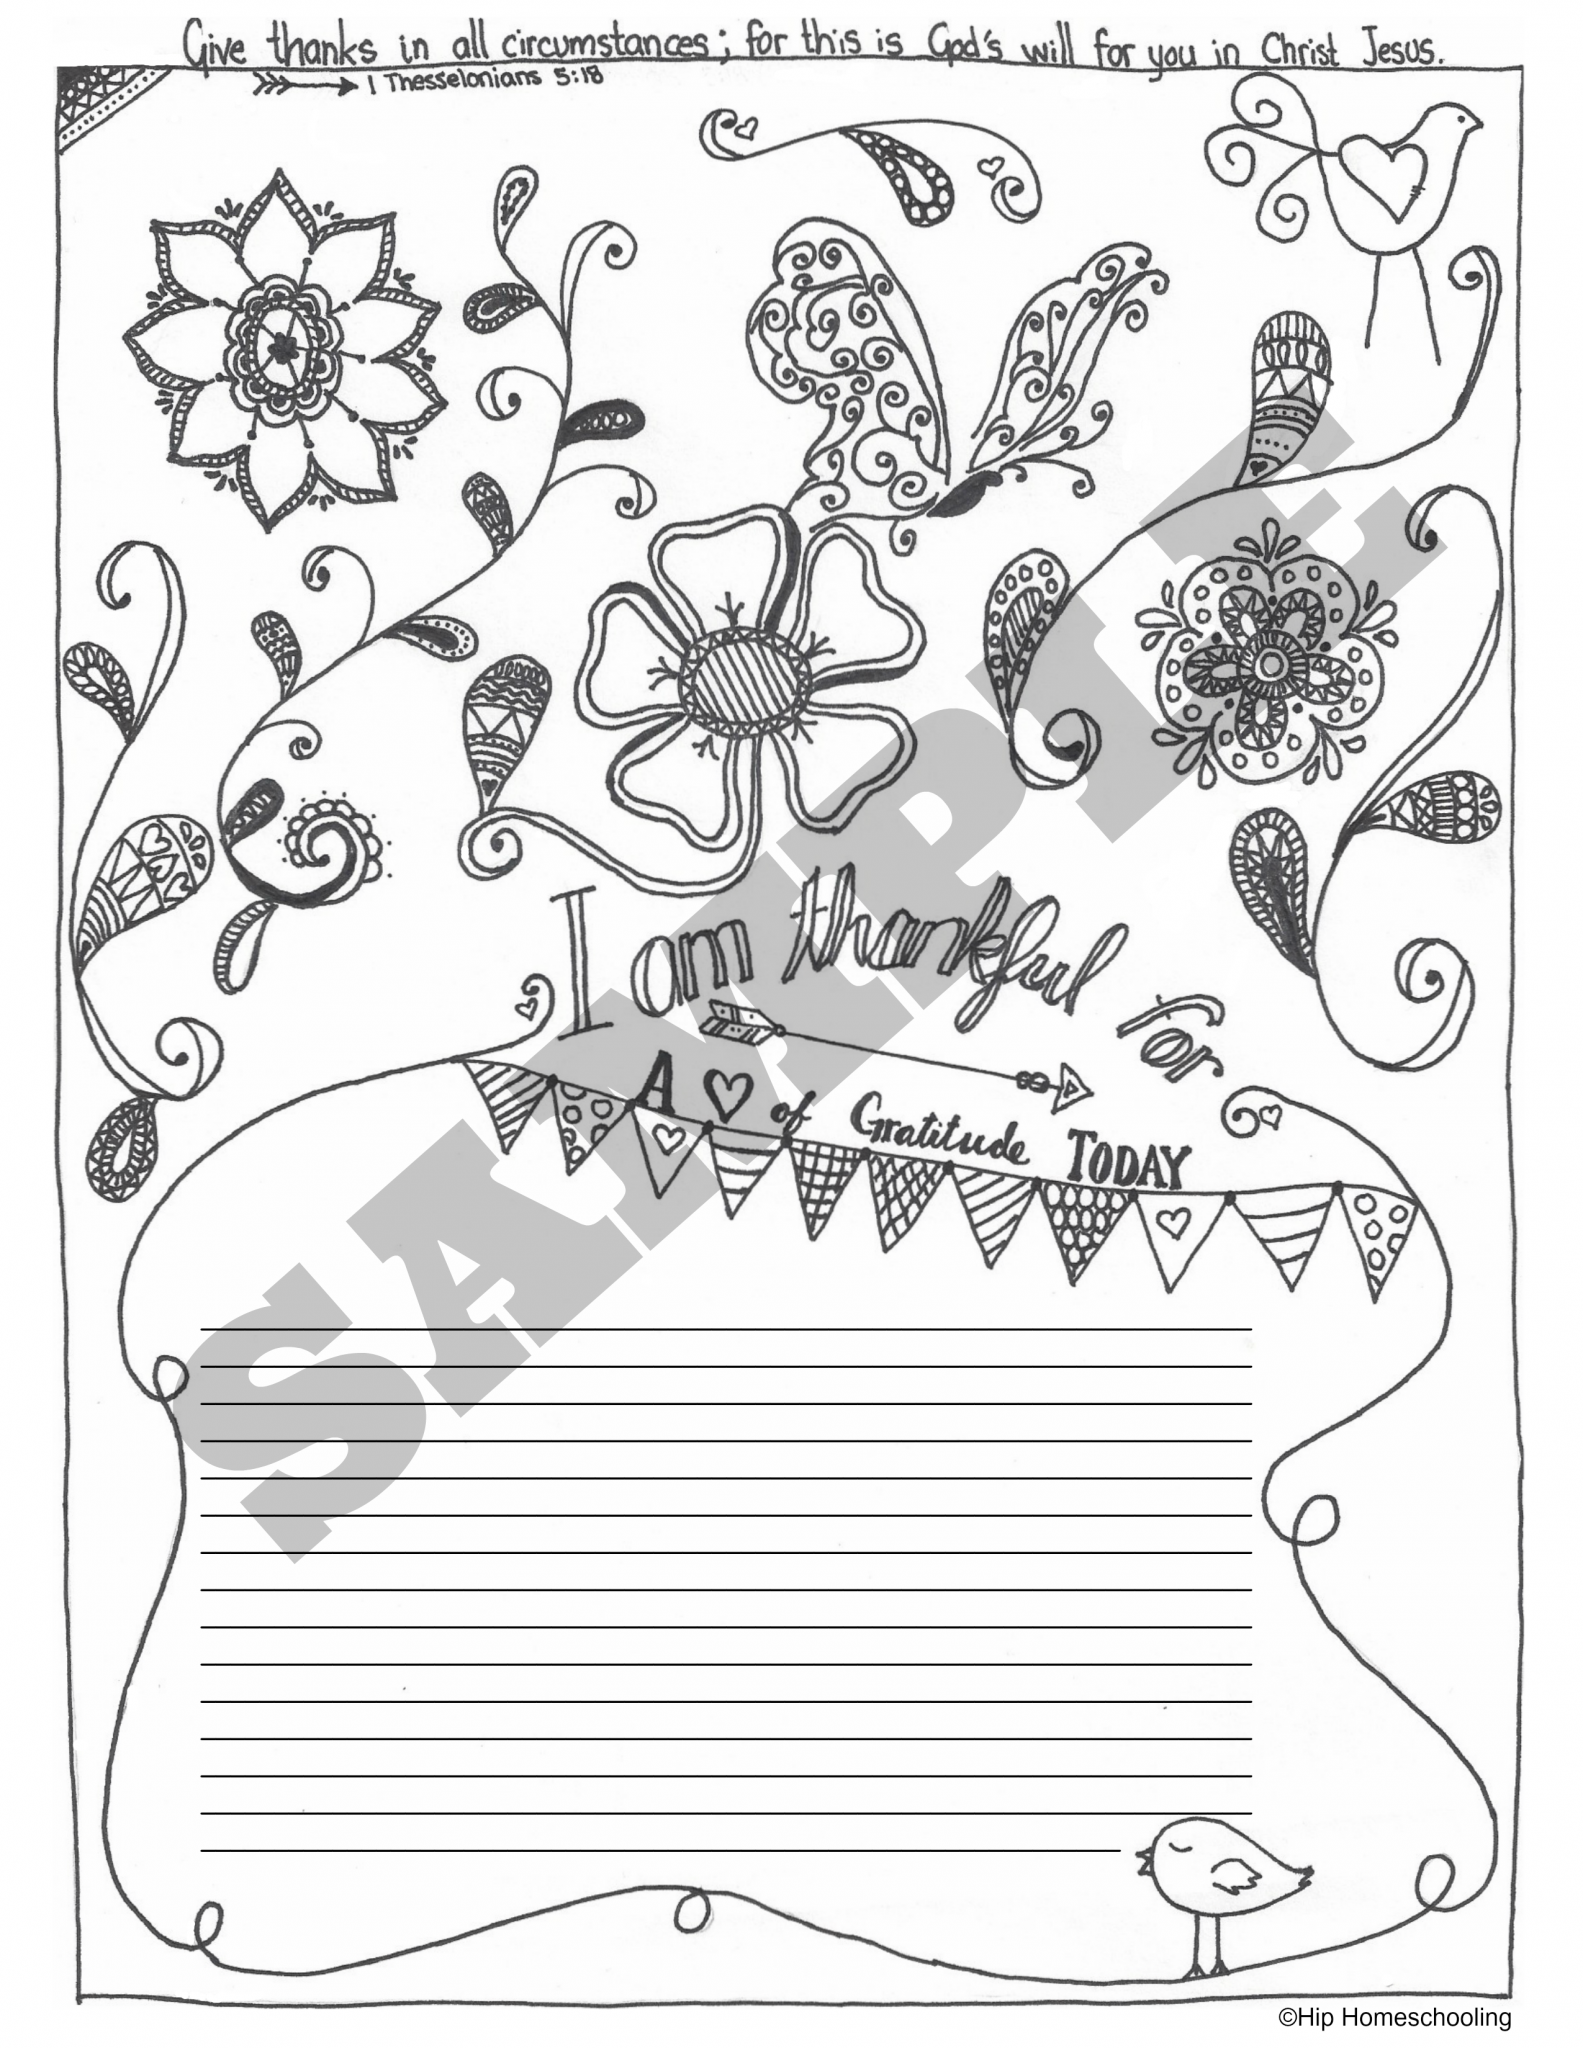 Free Gratitude Journal Template PLUS coloring page